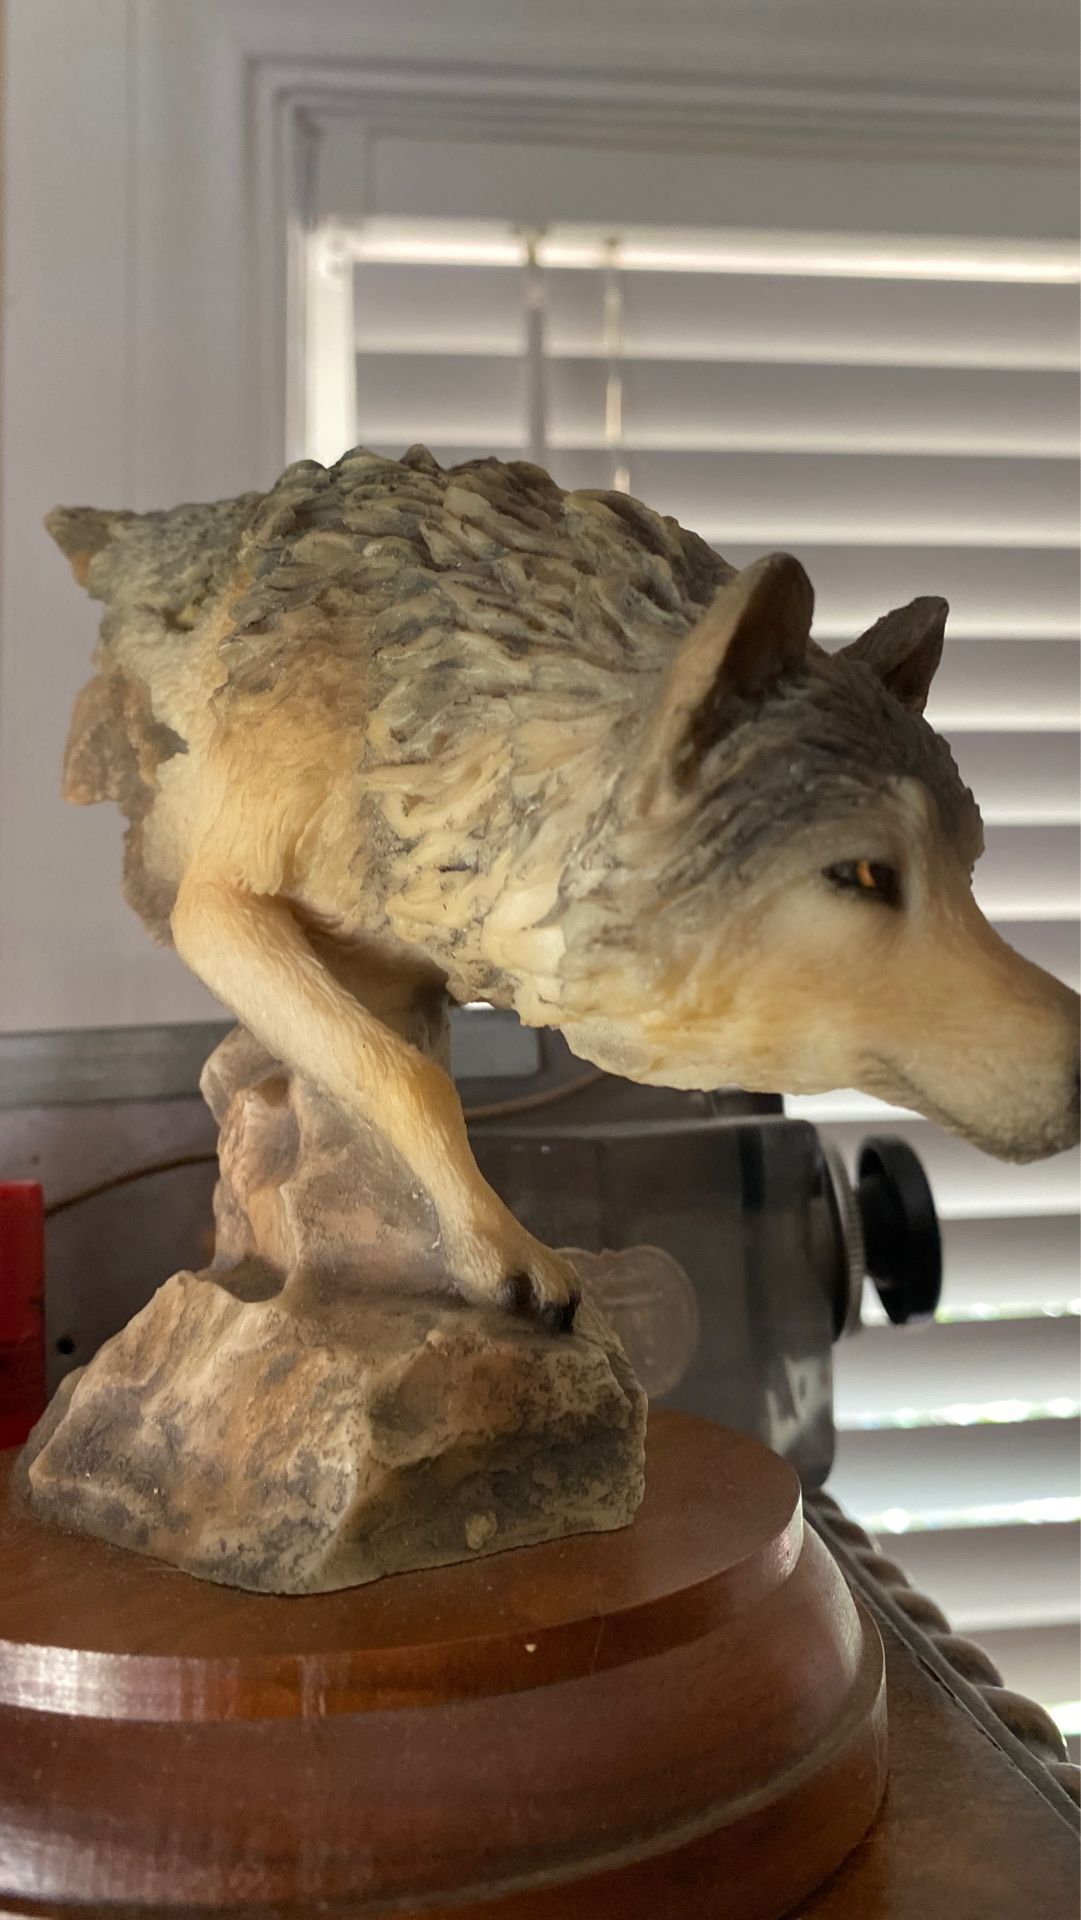 Wolf statue collectible 6 inches tall number 4194 titled footloose very good condition probably composite